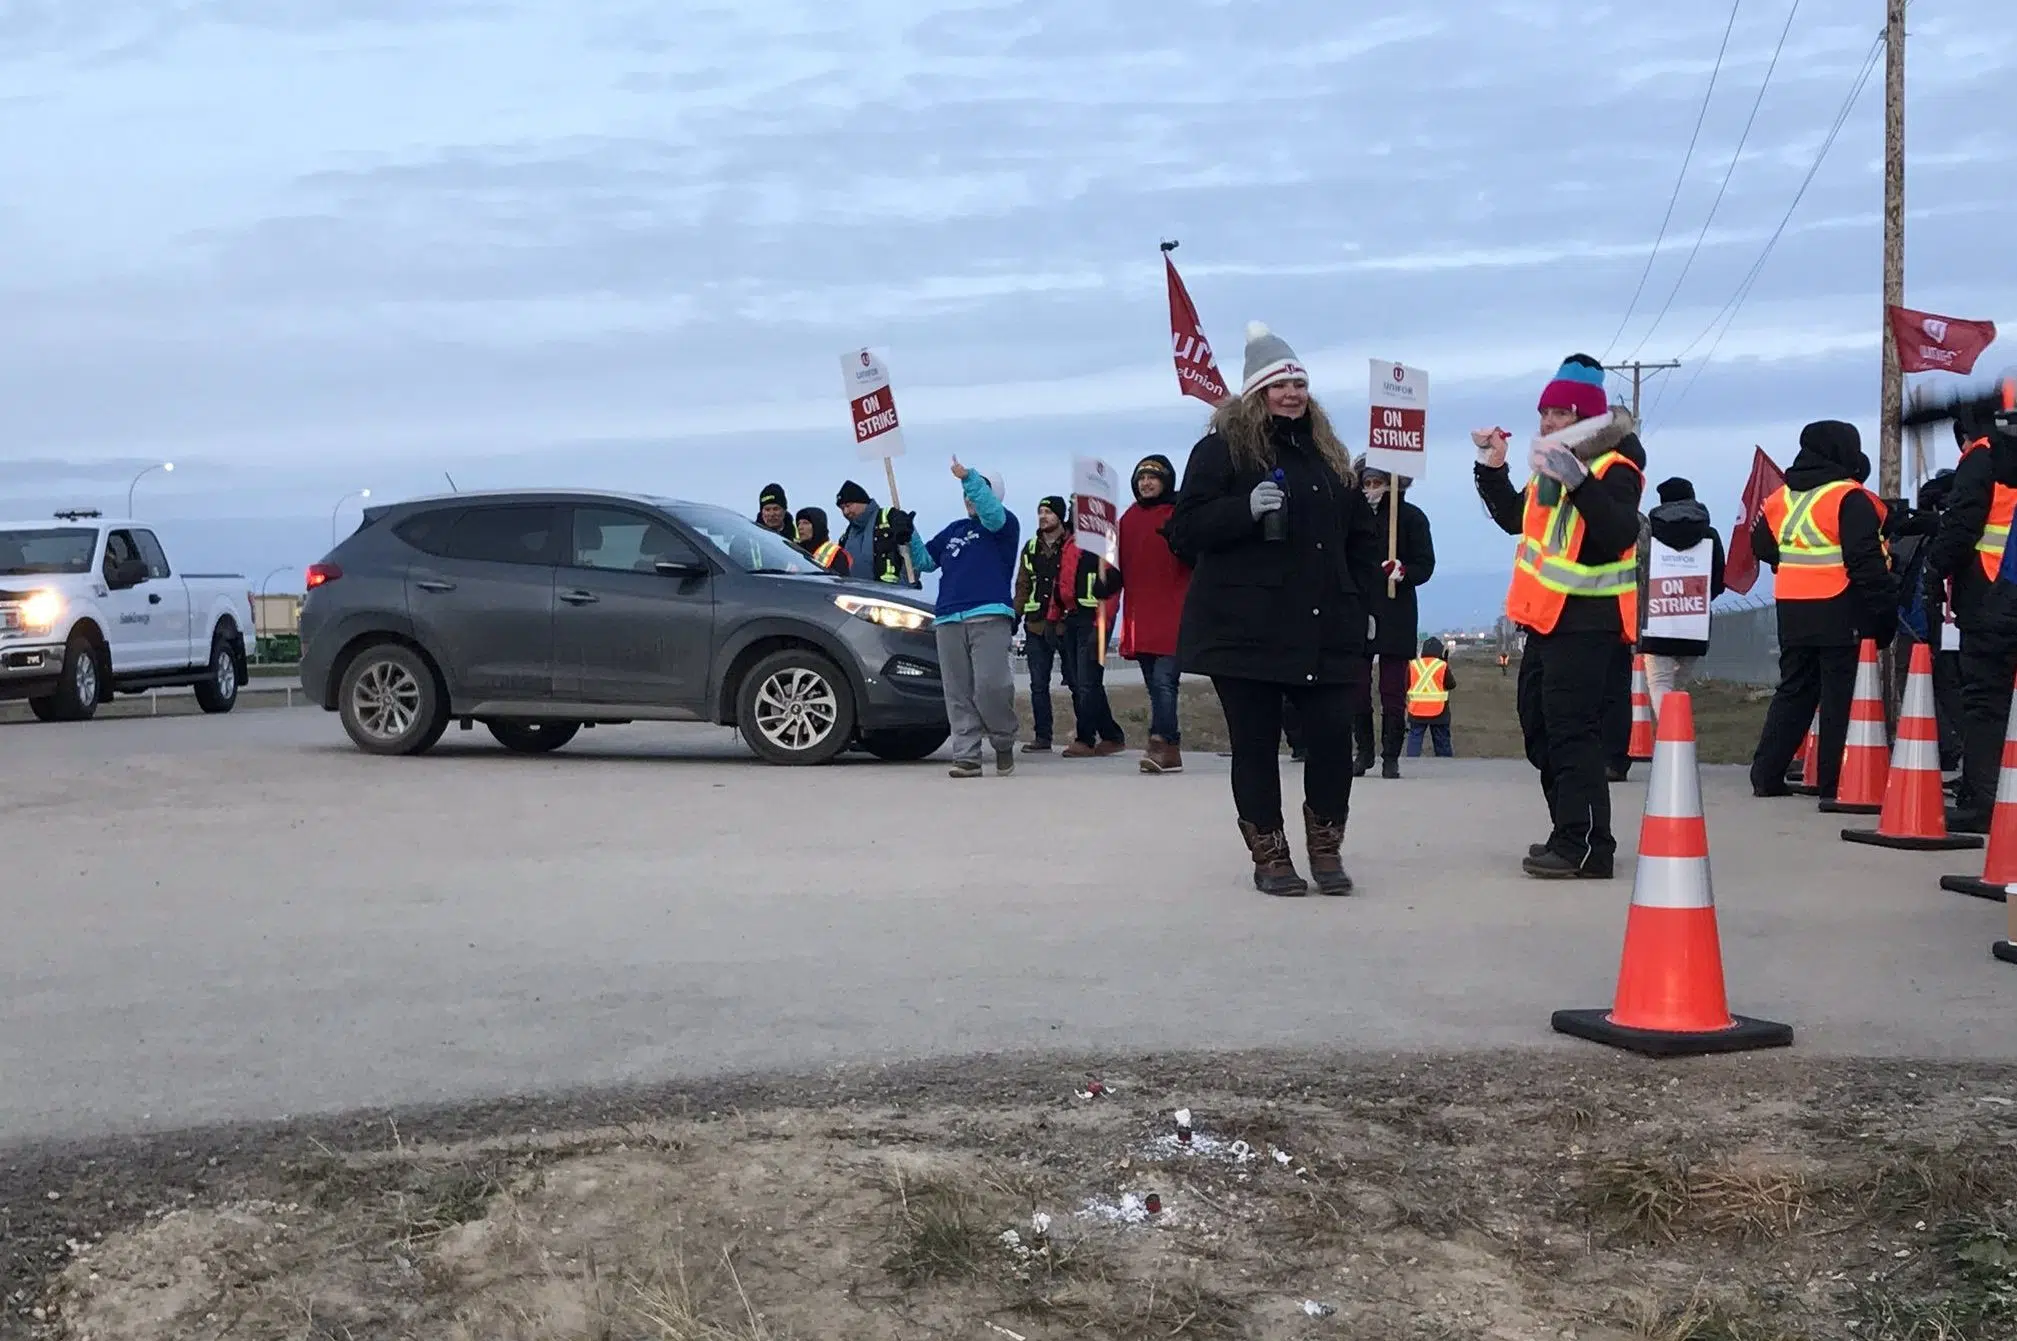 Picketers block SaskEnergy access, Crowns concerned about essential services